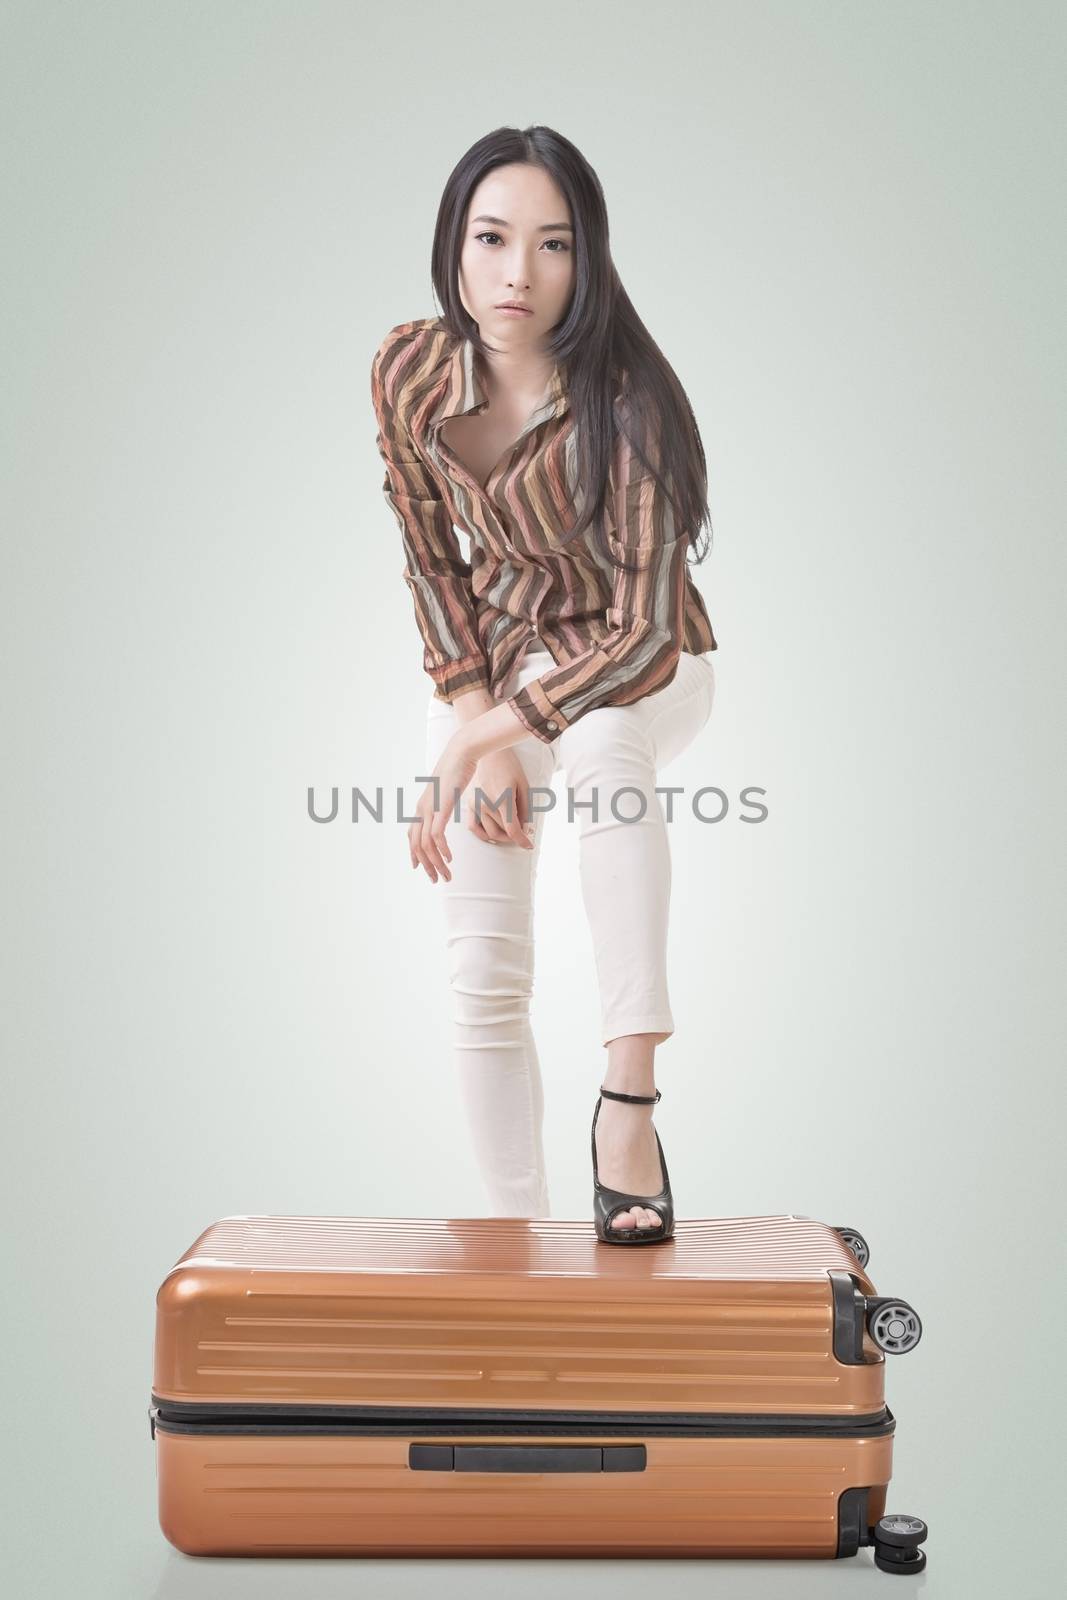 Modern Asian woman stand on a luggage, full length portrait on white background.